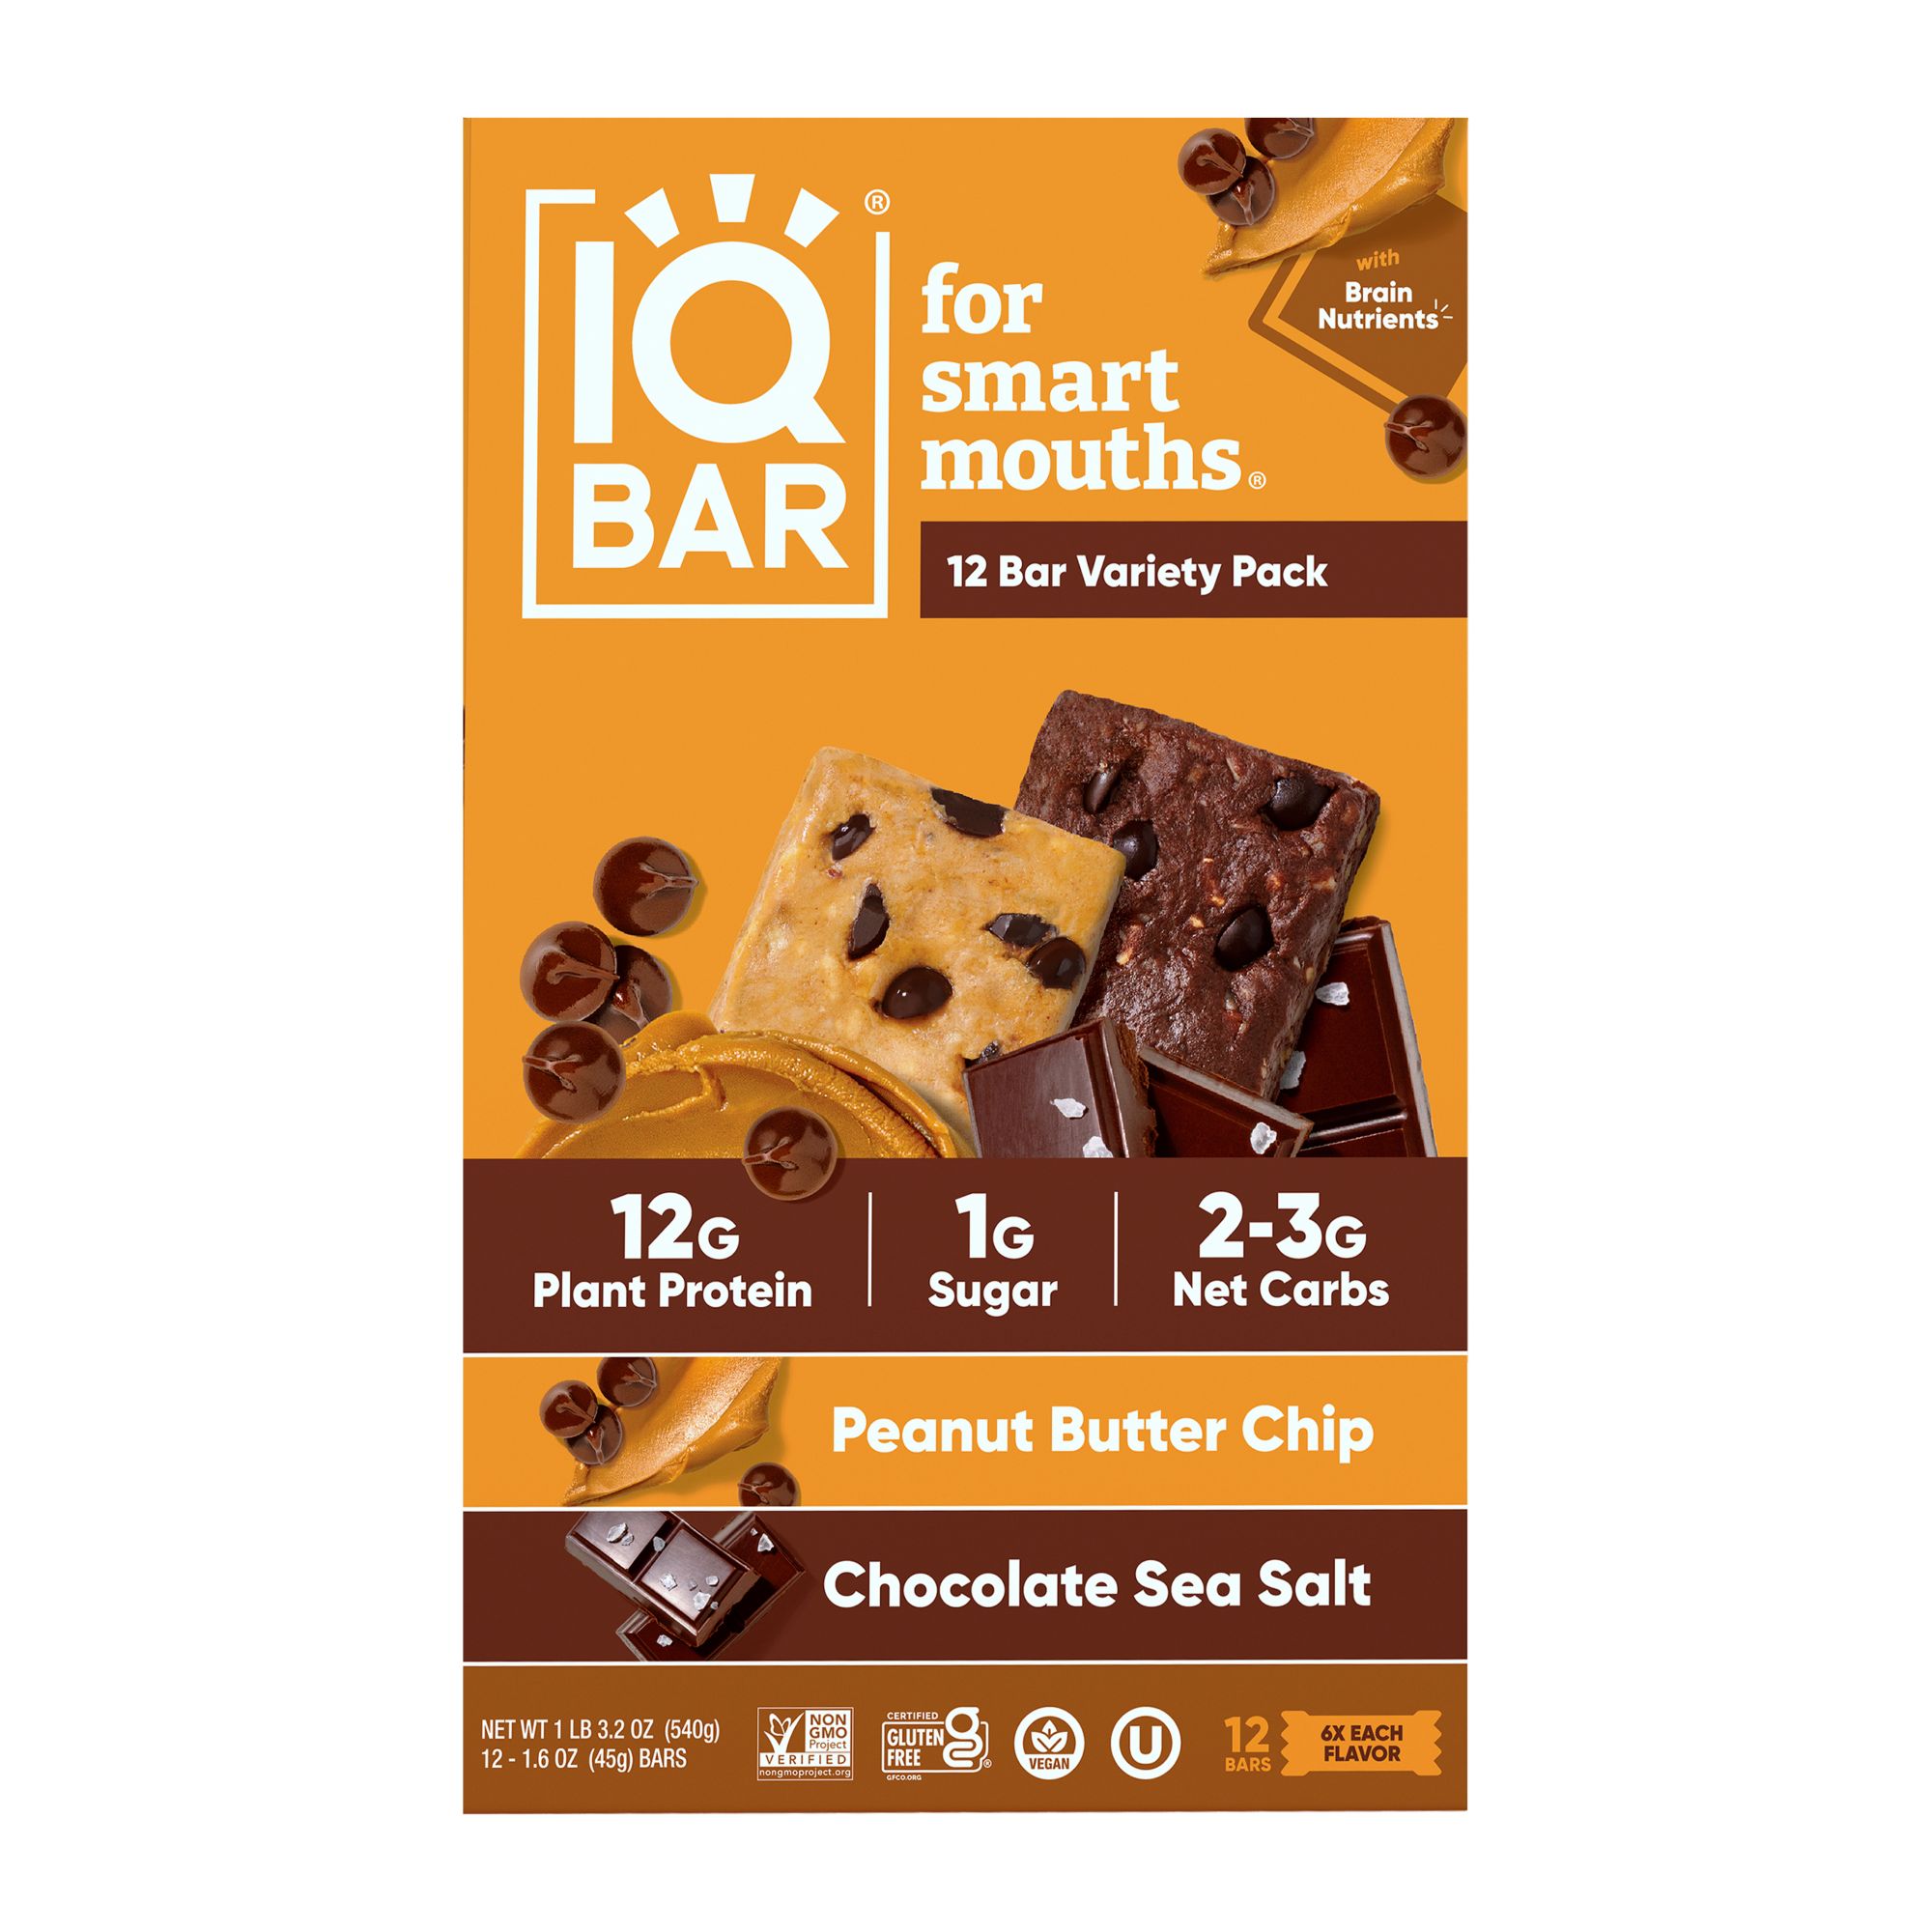 Ready Chocolate Chip Flavored Clean Protein Bar - 5 oz